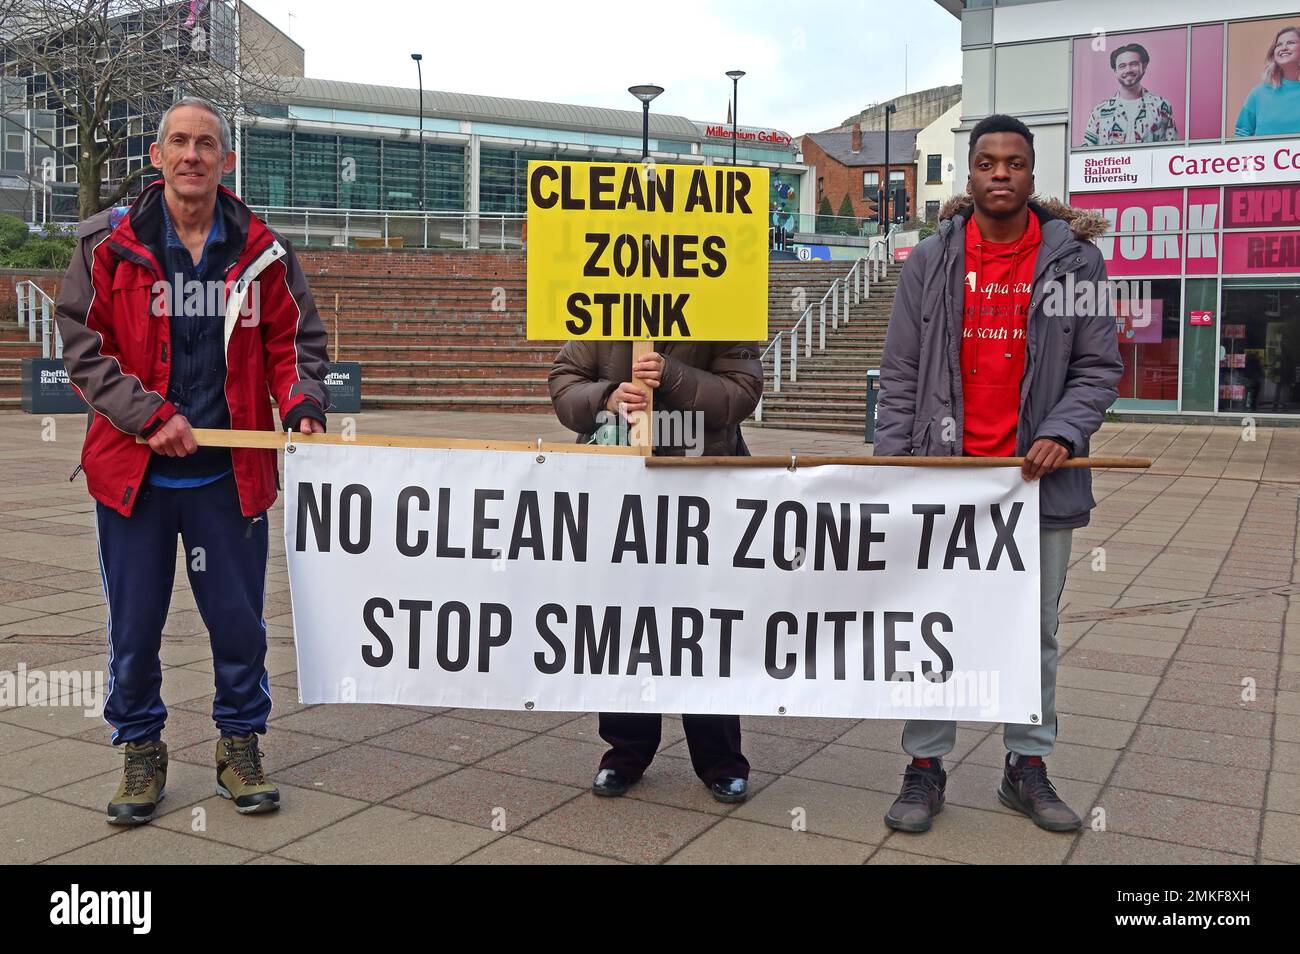 Sheffield Clean Air Zone, from 27 Feb 2023 - Clean Air Zones Stink sign - demonstrators No Clean Air Zone Tax - Stop Smart Cities - CAZ Stock Photo